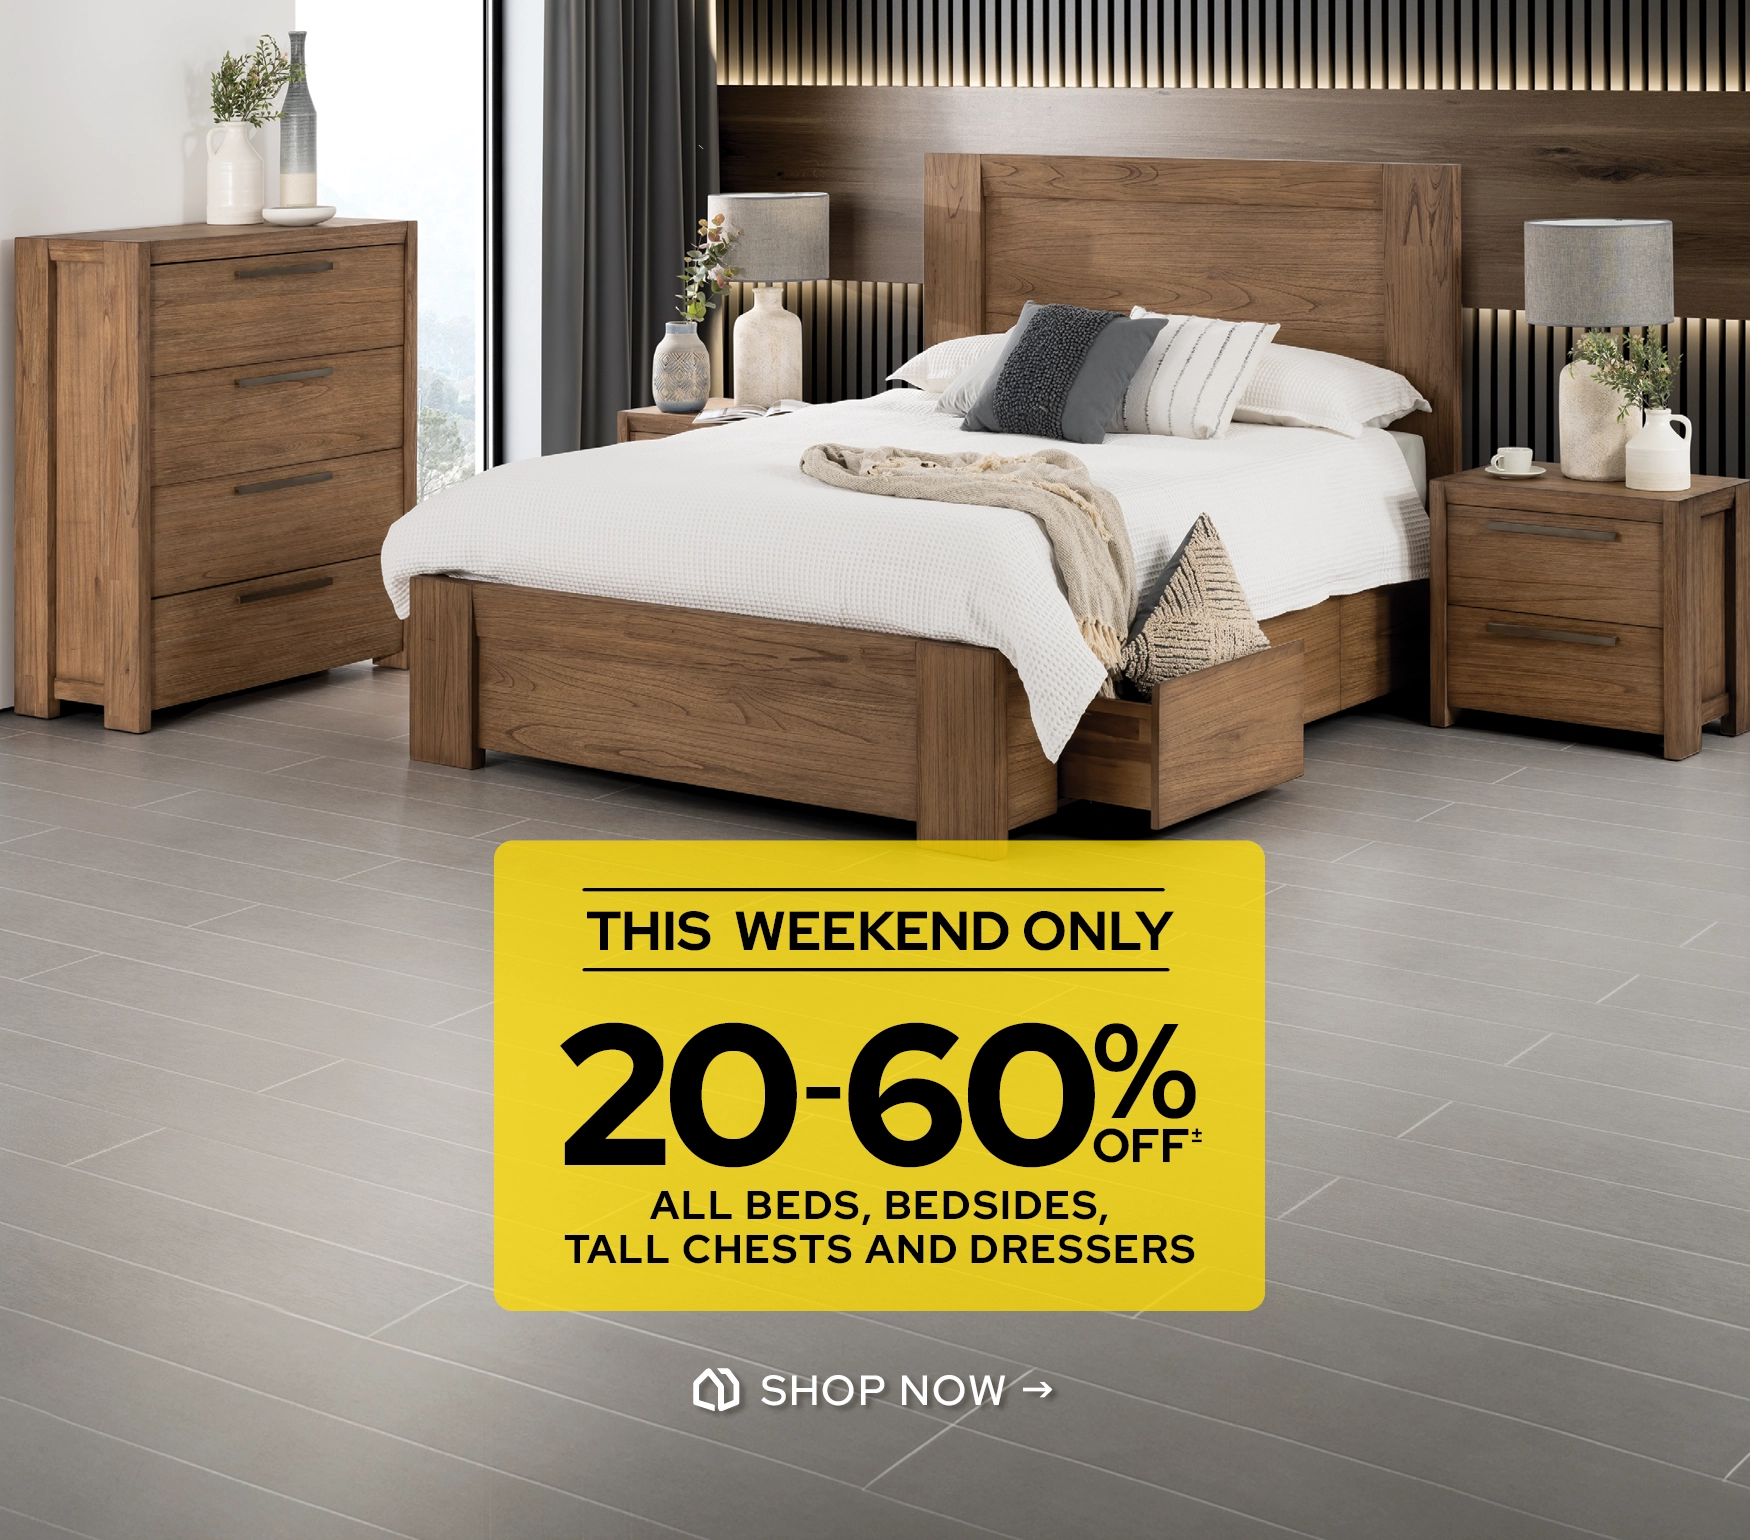 This Weekend Only - Bedroom Offer±